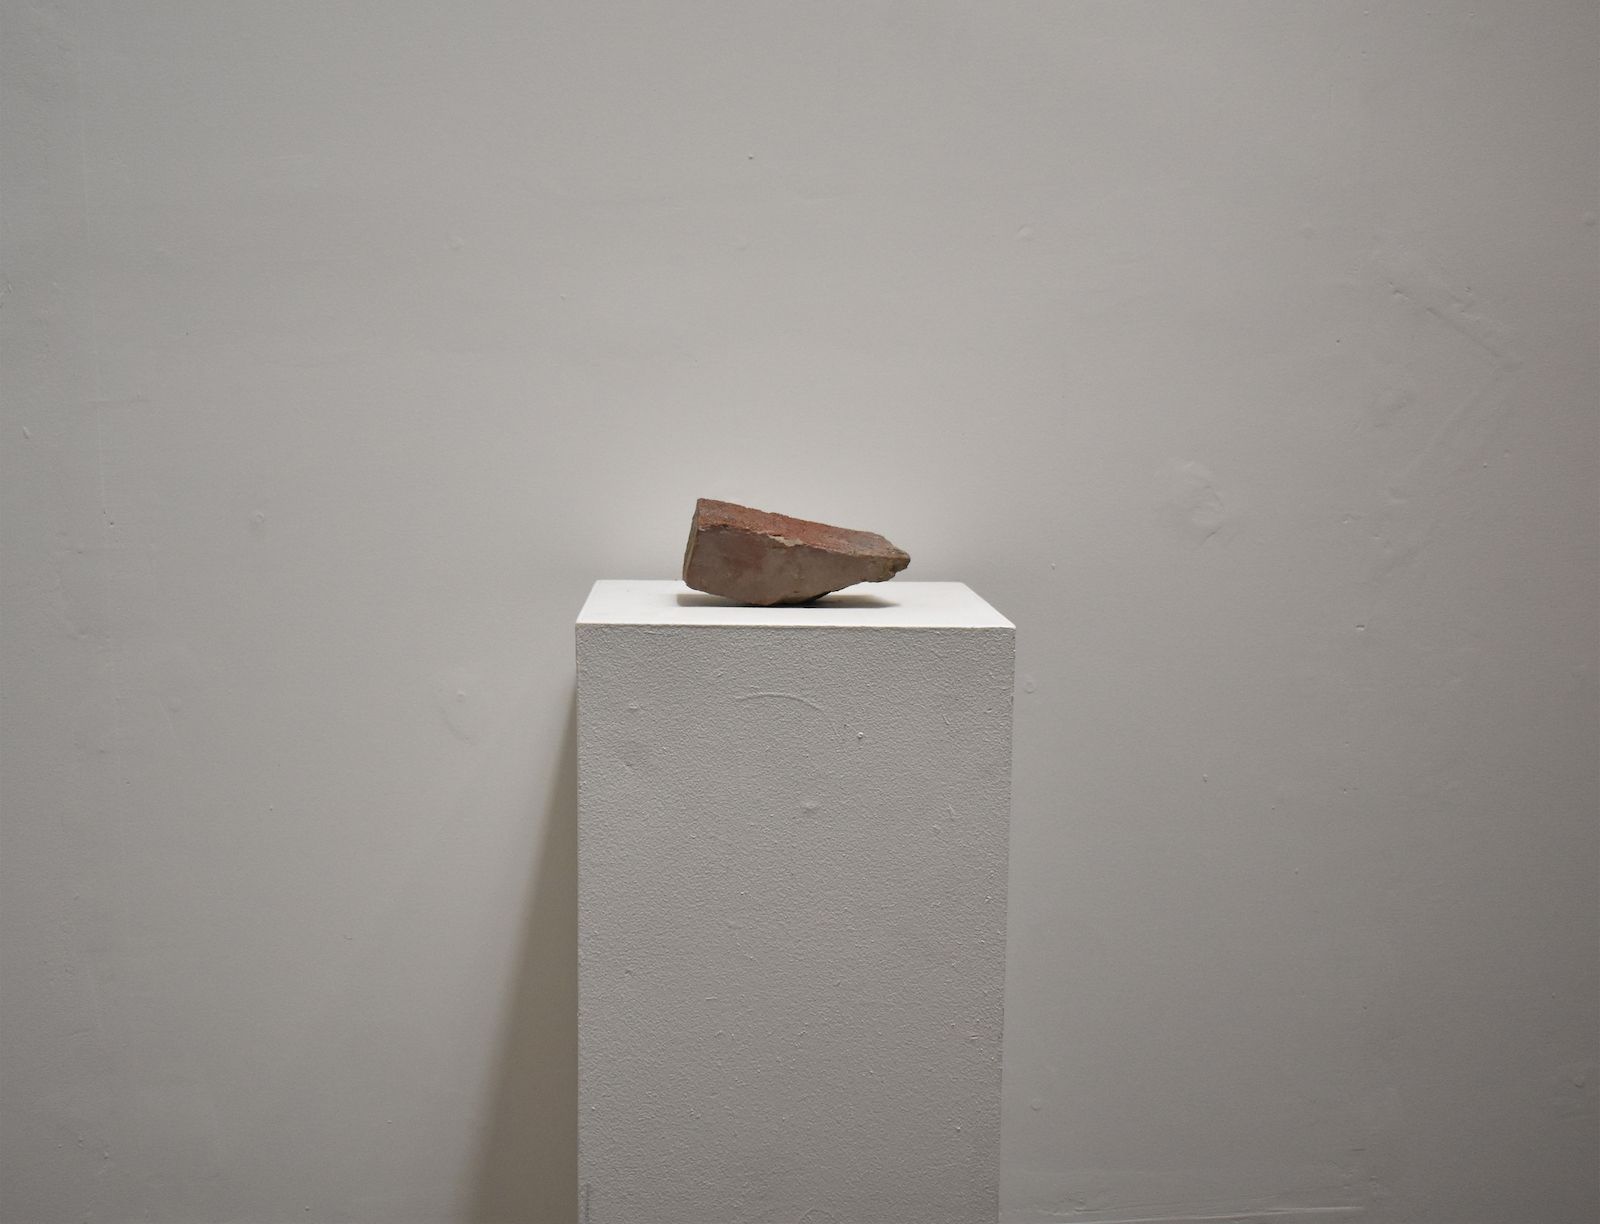 © Laura Gibson - Last One Standing (The Reclaiming) 2019 Reclaimed brick from childhood home 16127 Fielding, Detroit, MI Photo